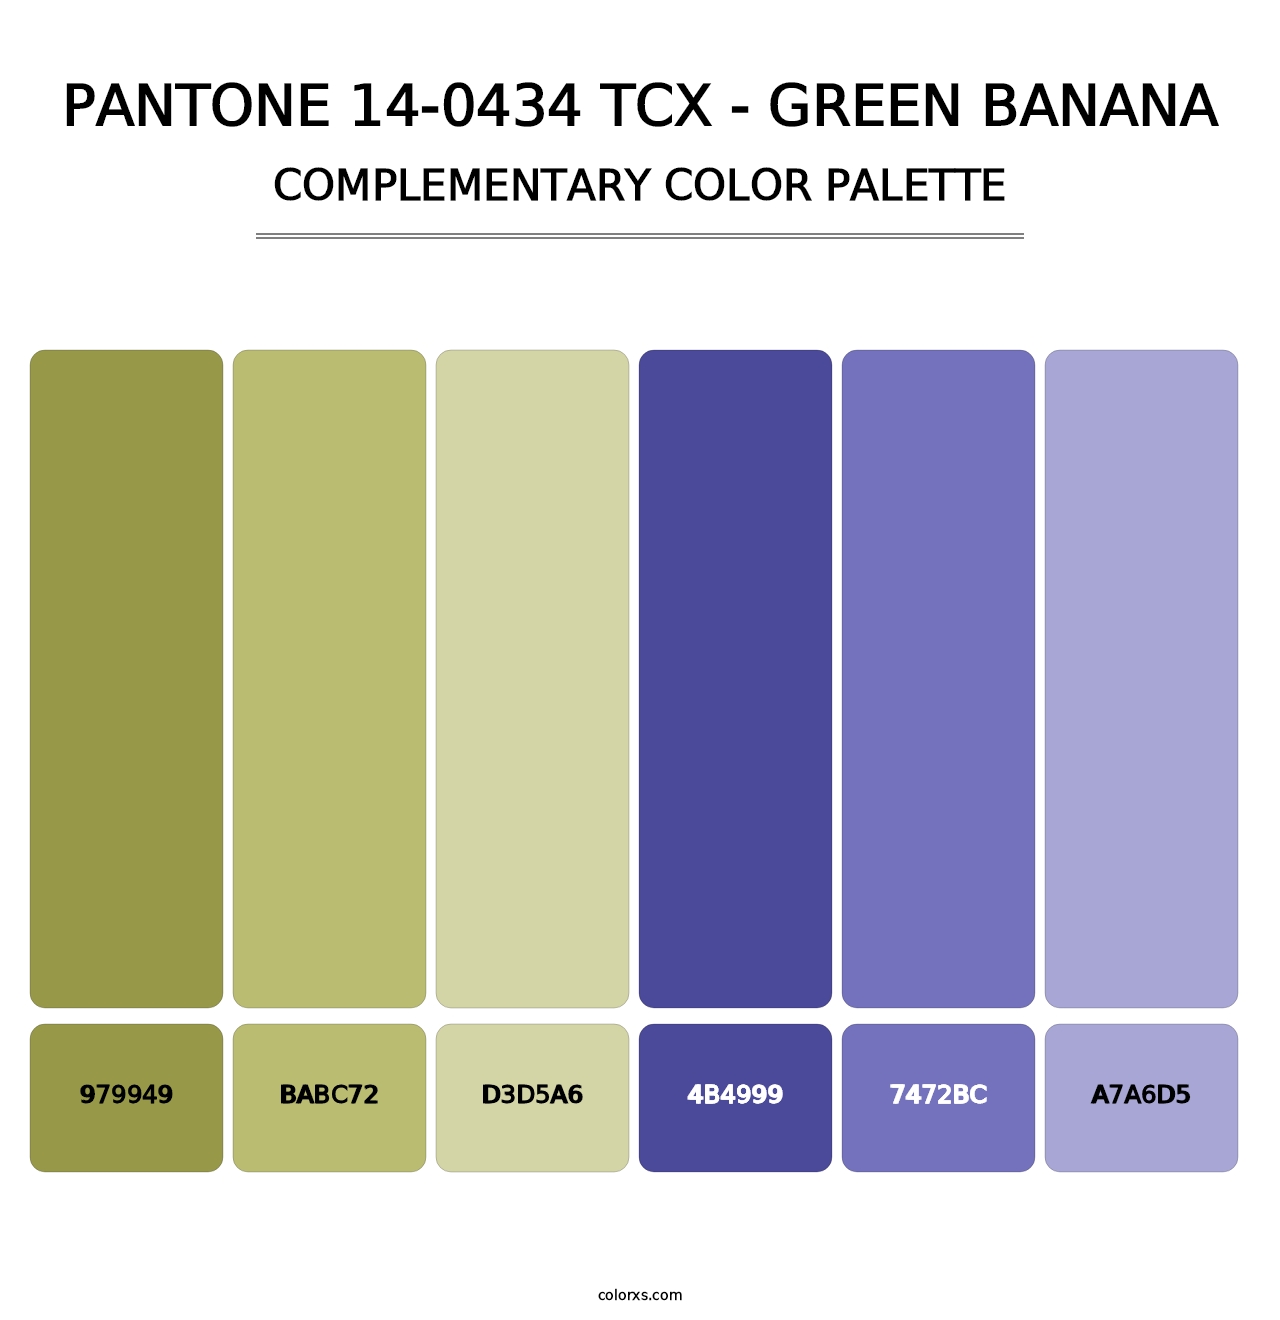 PANTONE 14-0434 TCX - Green Banana - Complementary Color Palette